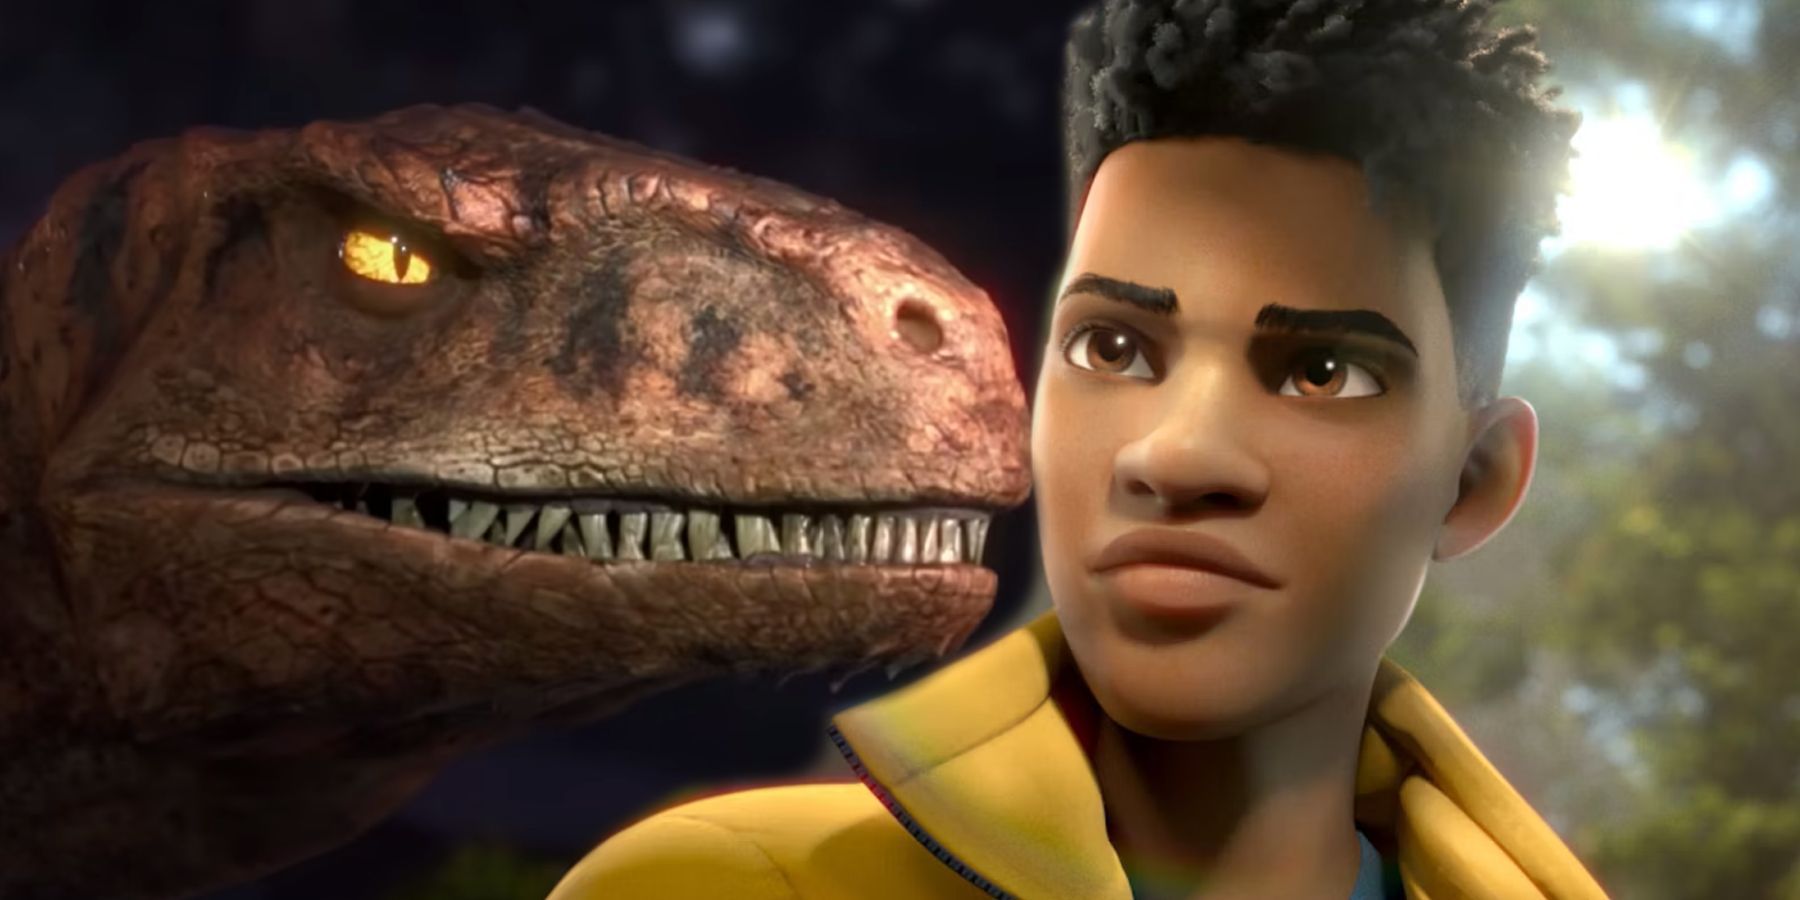 Velociraptor growling next to Darius looking confident in Jurassic World Chaos Theory